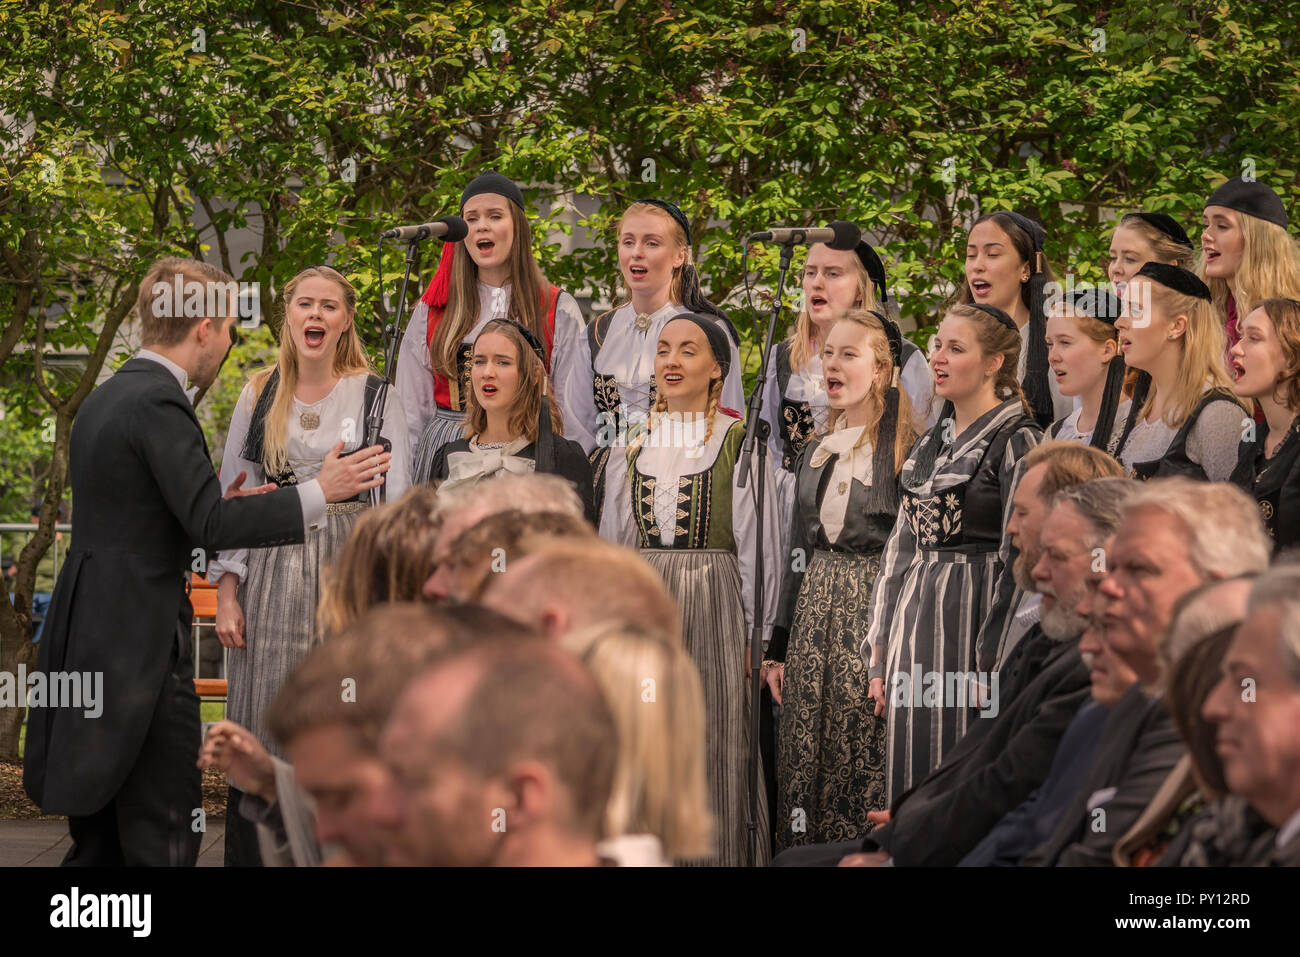 Choir, women dressed in Iceland's national costume, independence day, June 17th, Reykjavik, Iceland. Stock Photo